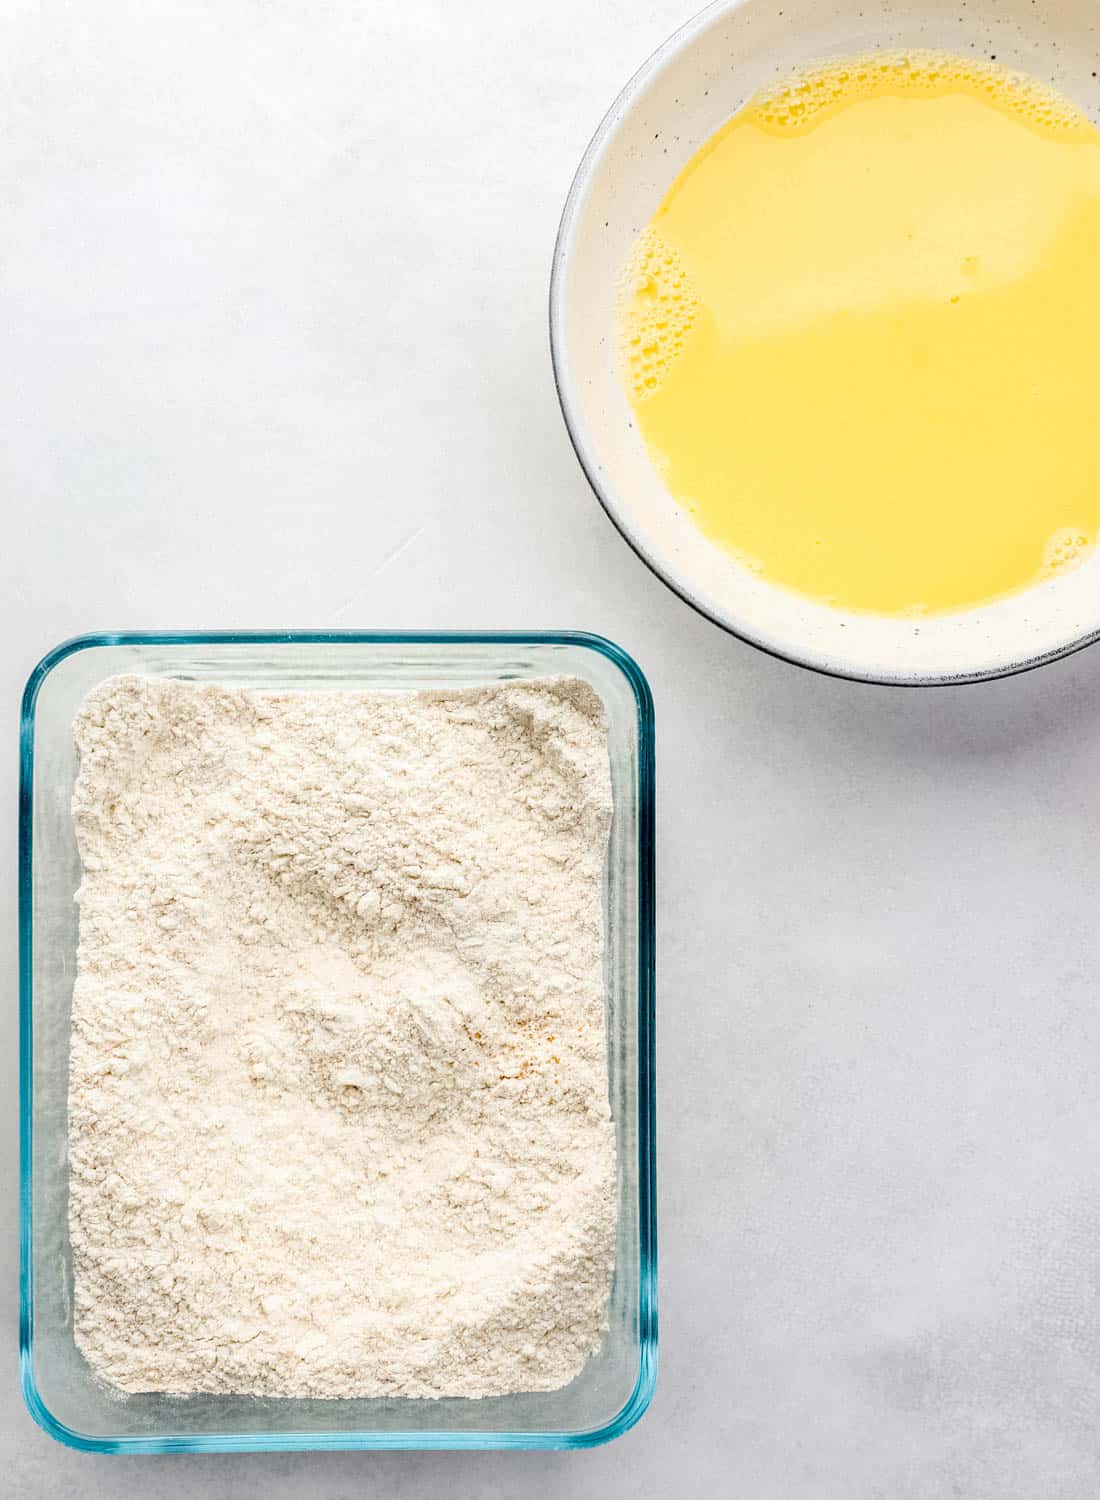 Flour mixture in a rectangle glass container and egg mixture in a white bowl. 